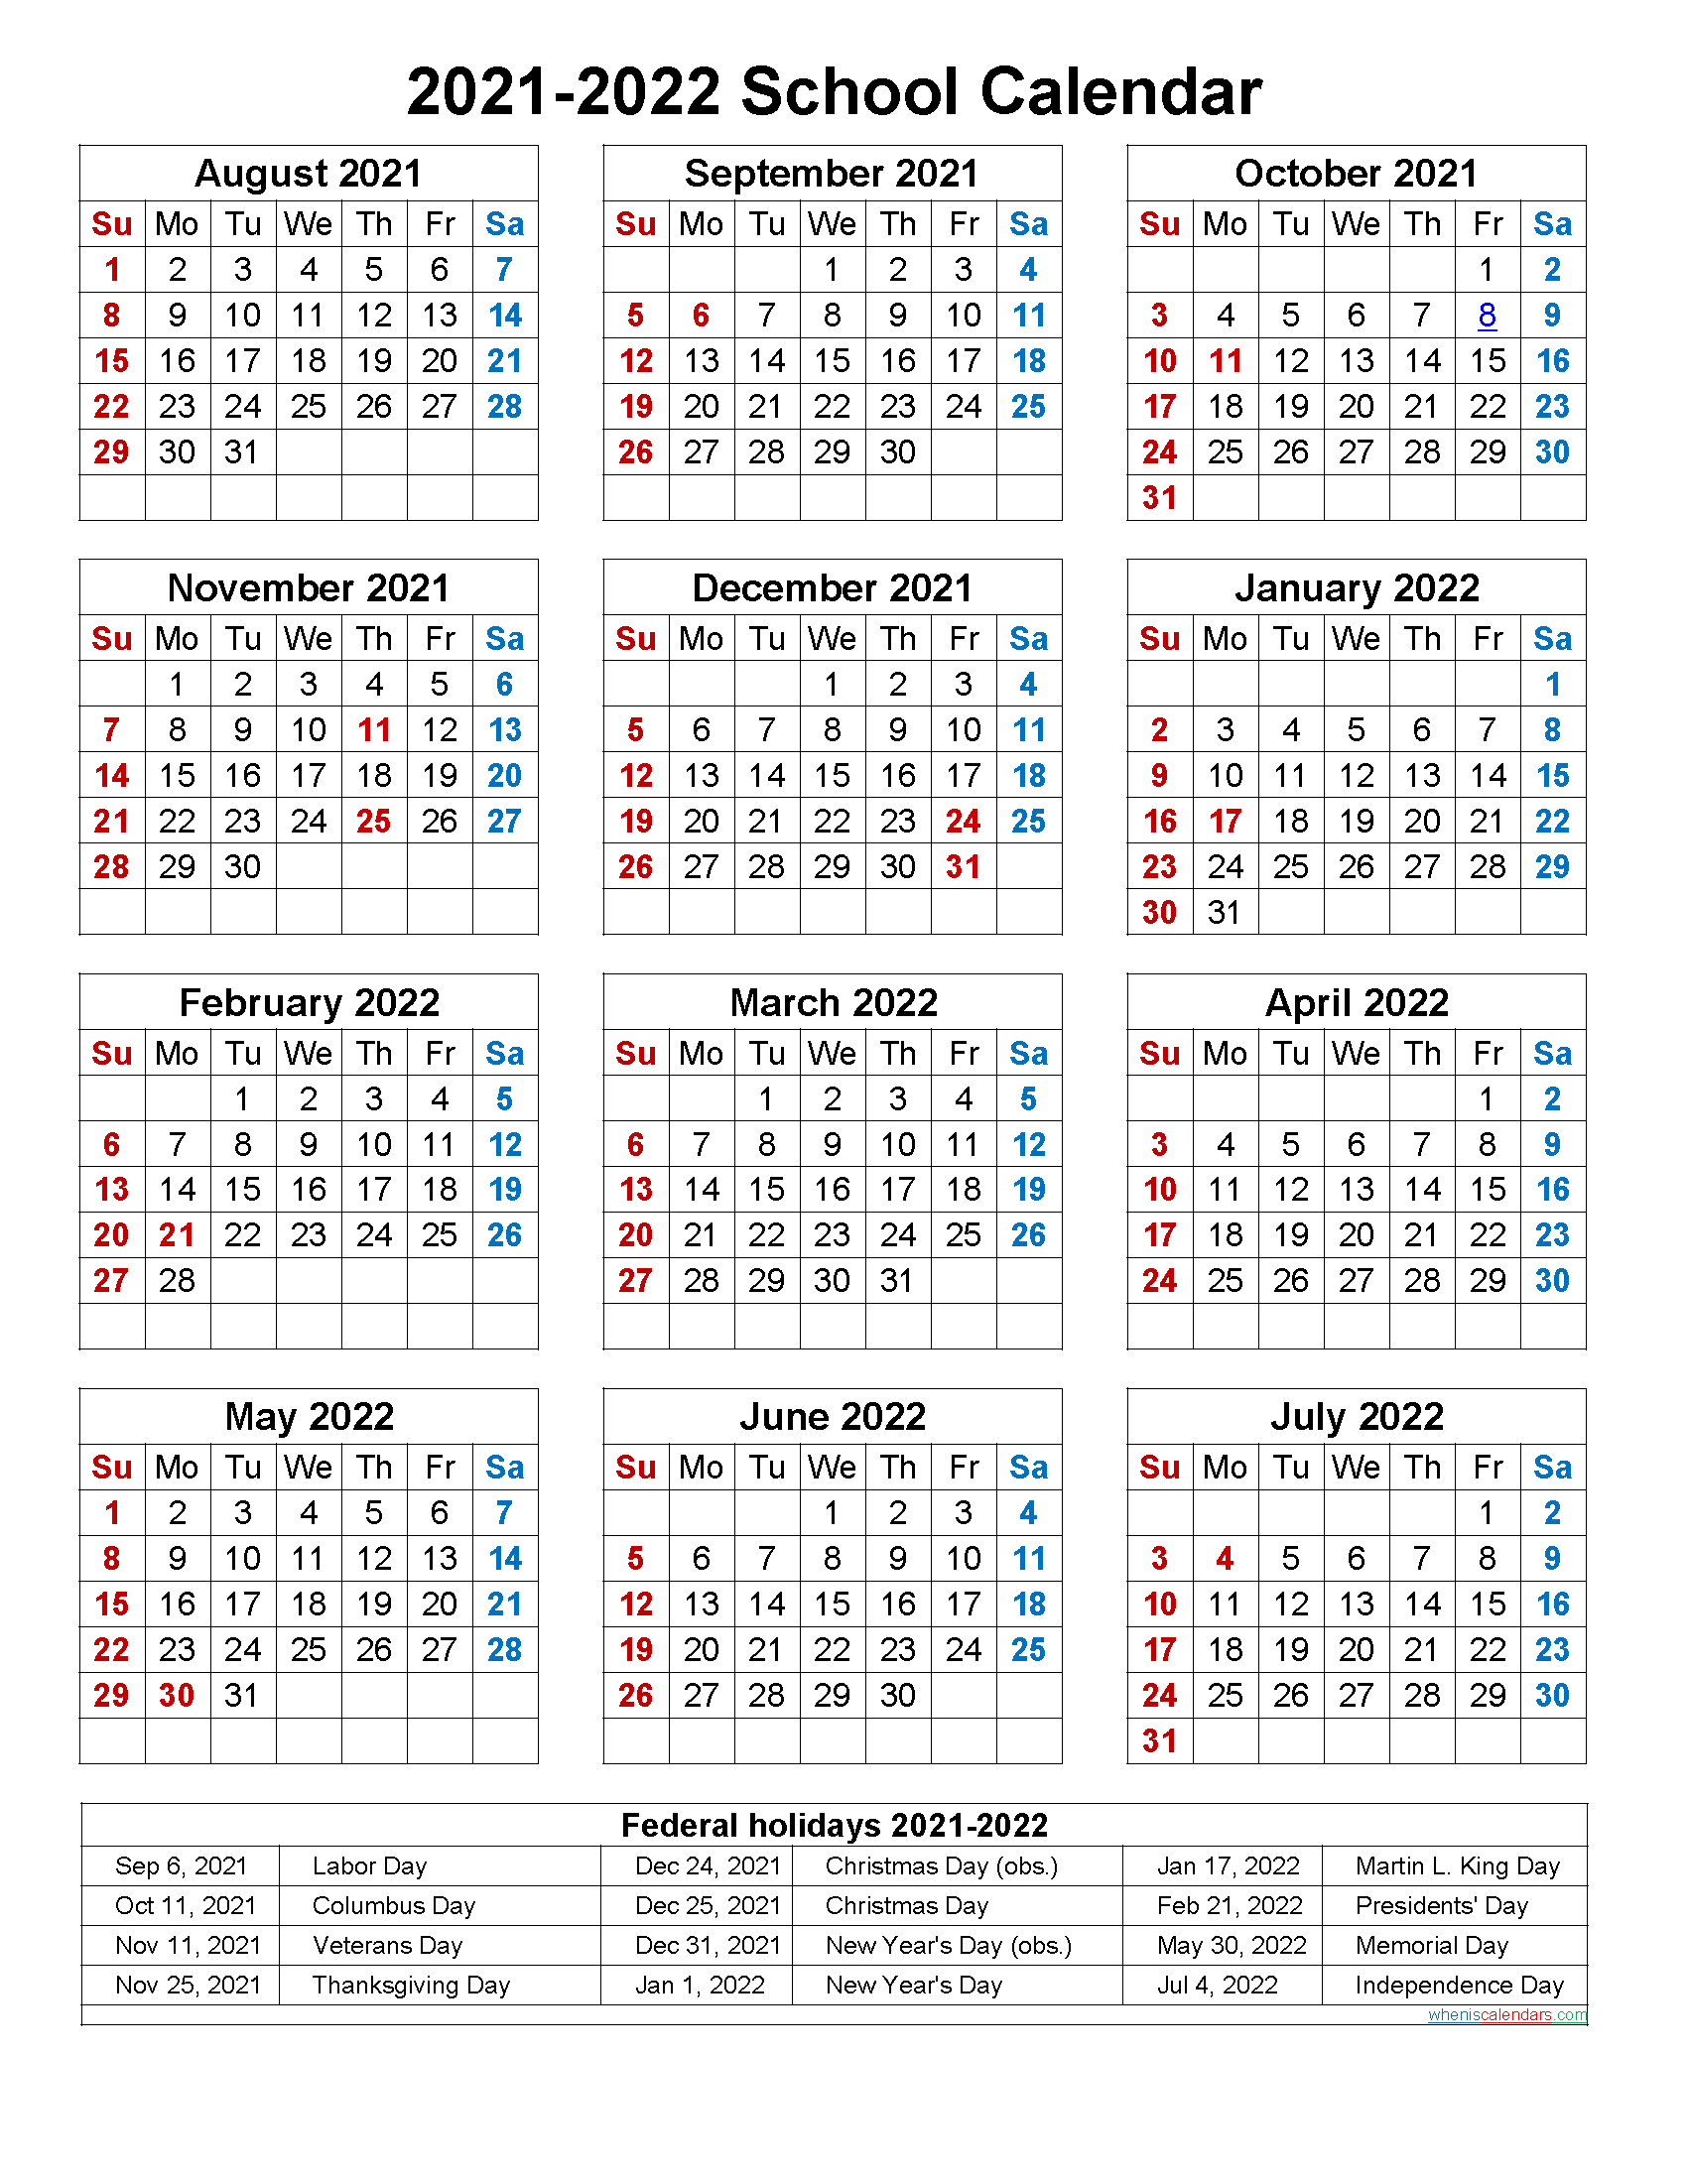 Download Free School Calendar 2020 to 2021 as PDF and Image